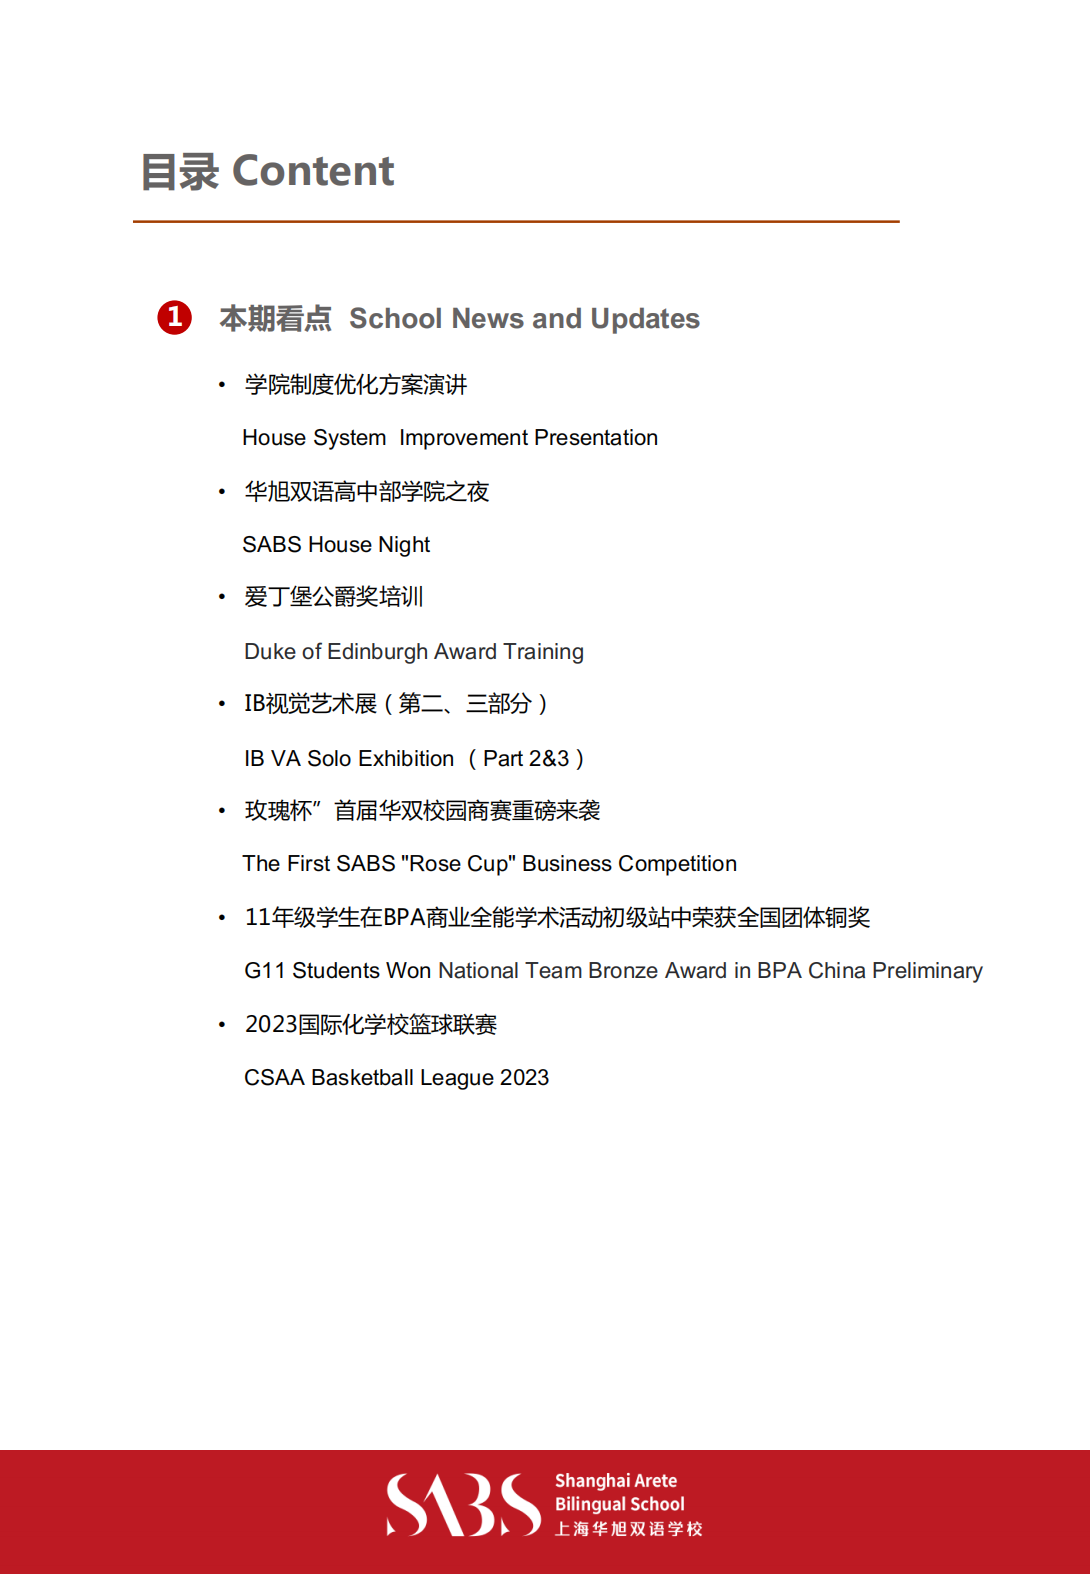 HS 3rd Issue Newsletter pptx（Chinese）_01.png